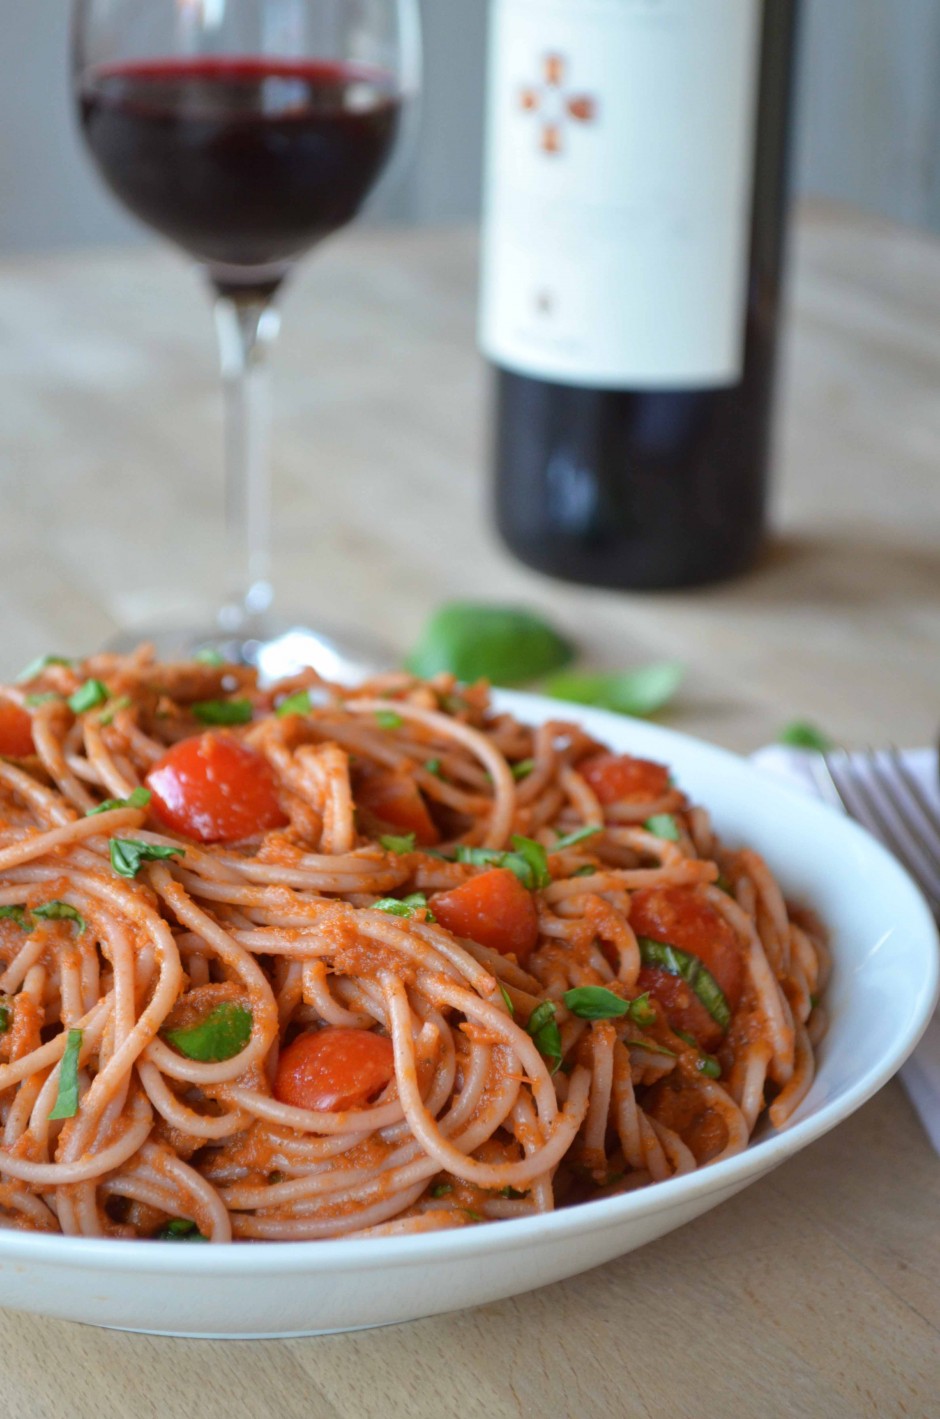 The best marinara pasta sauce. Recipe and photo by That Healthy Kitchen